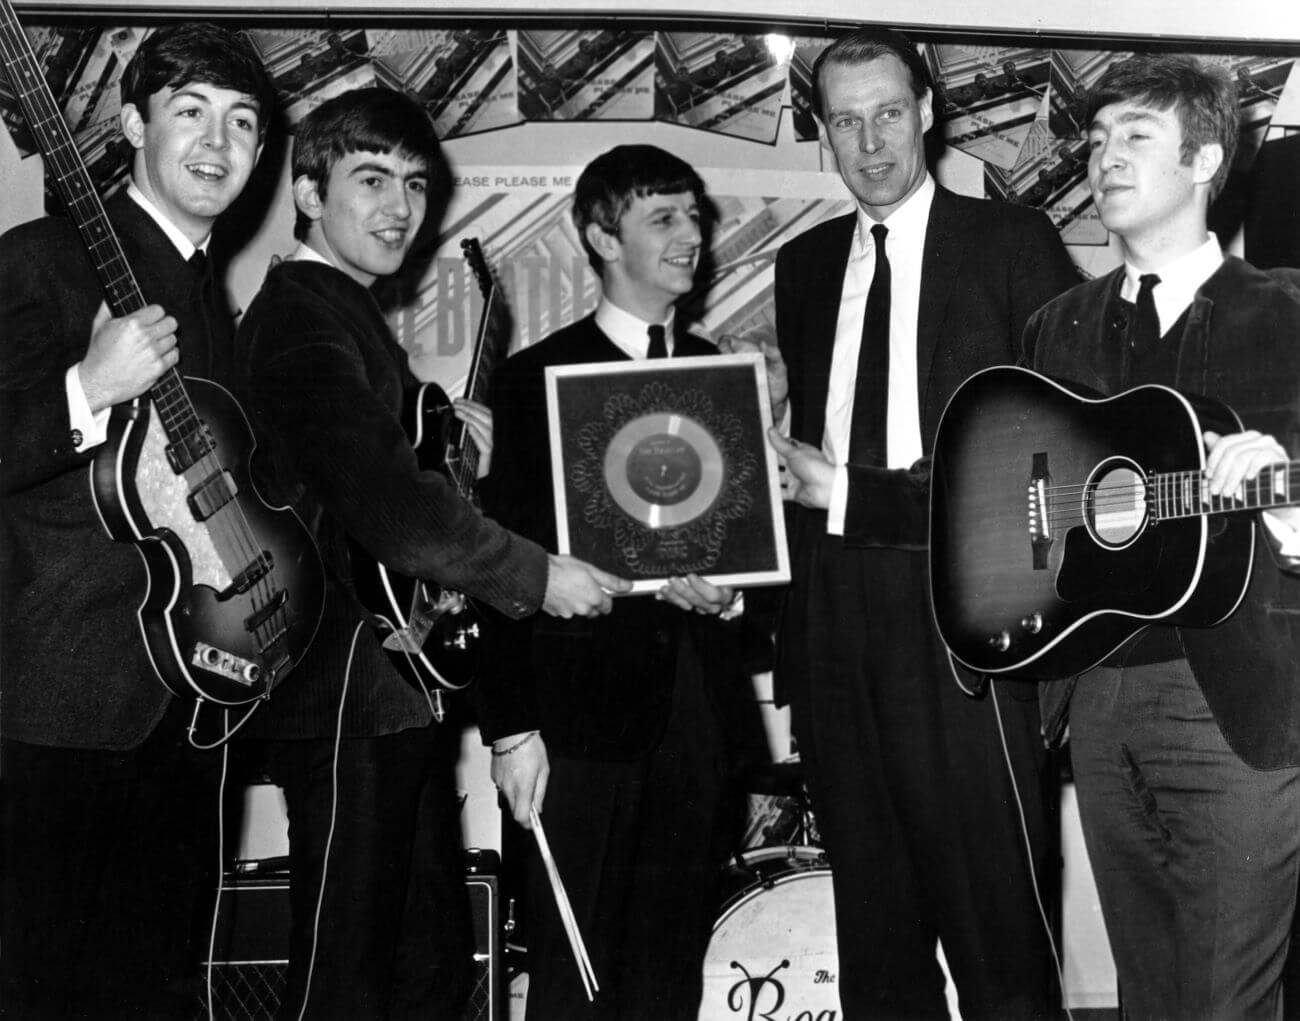 A black and white picture of Paul McCartney, George Harrison, Ringo Starr, George Martin, and John Lennon posing with a record.